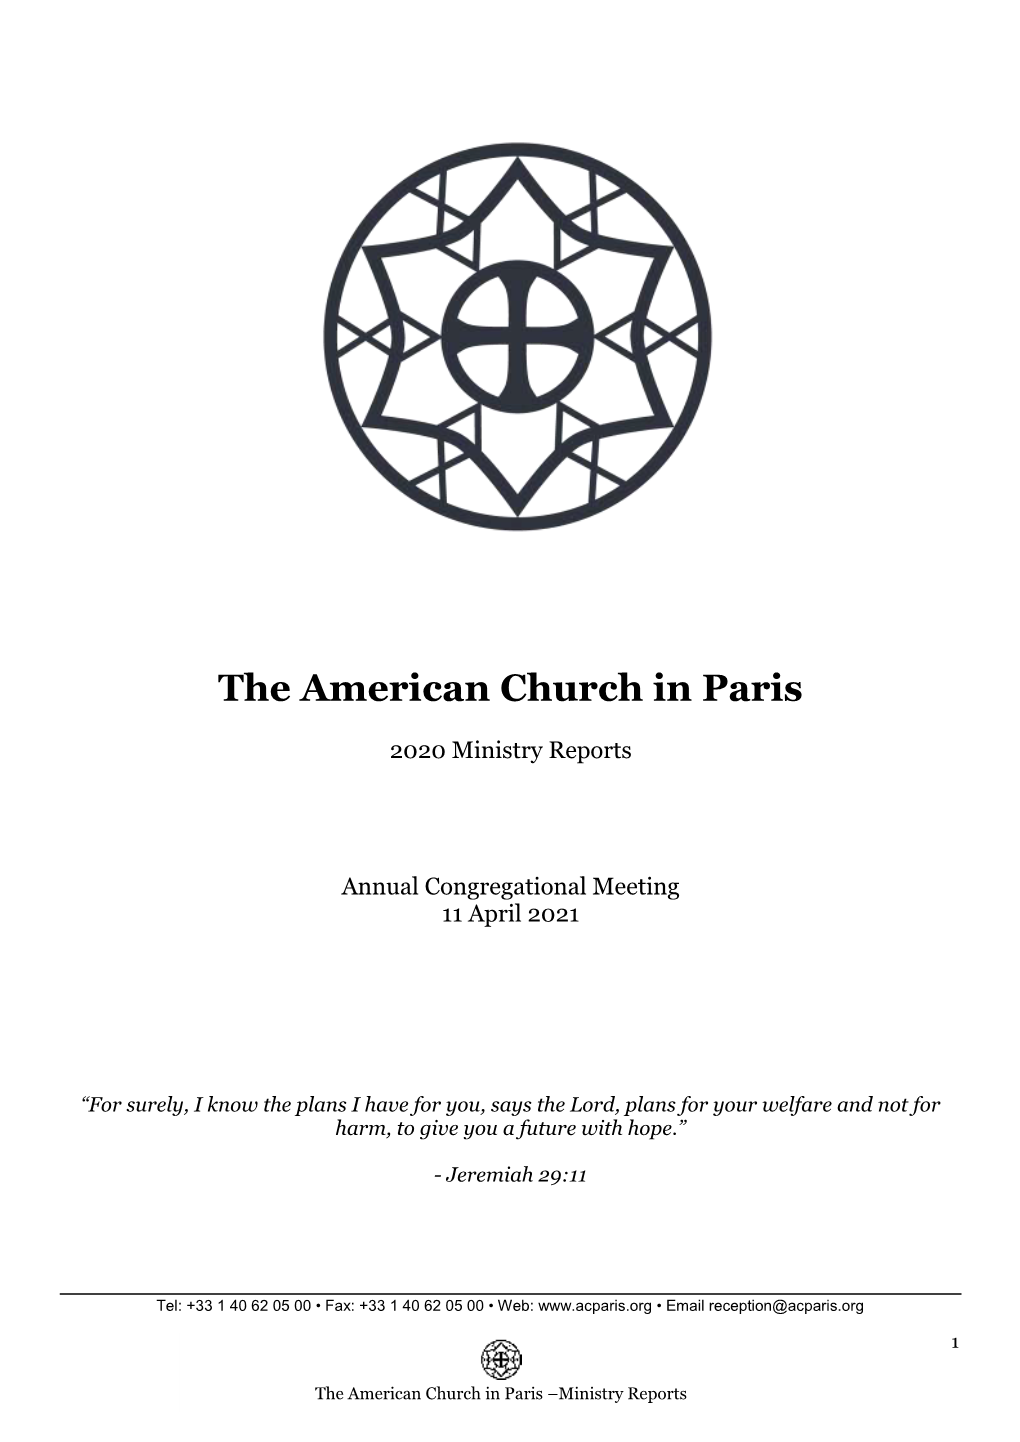 The Ministry of the American Church Depends on You